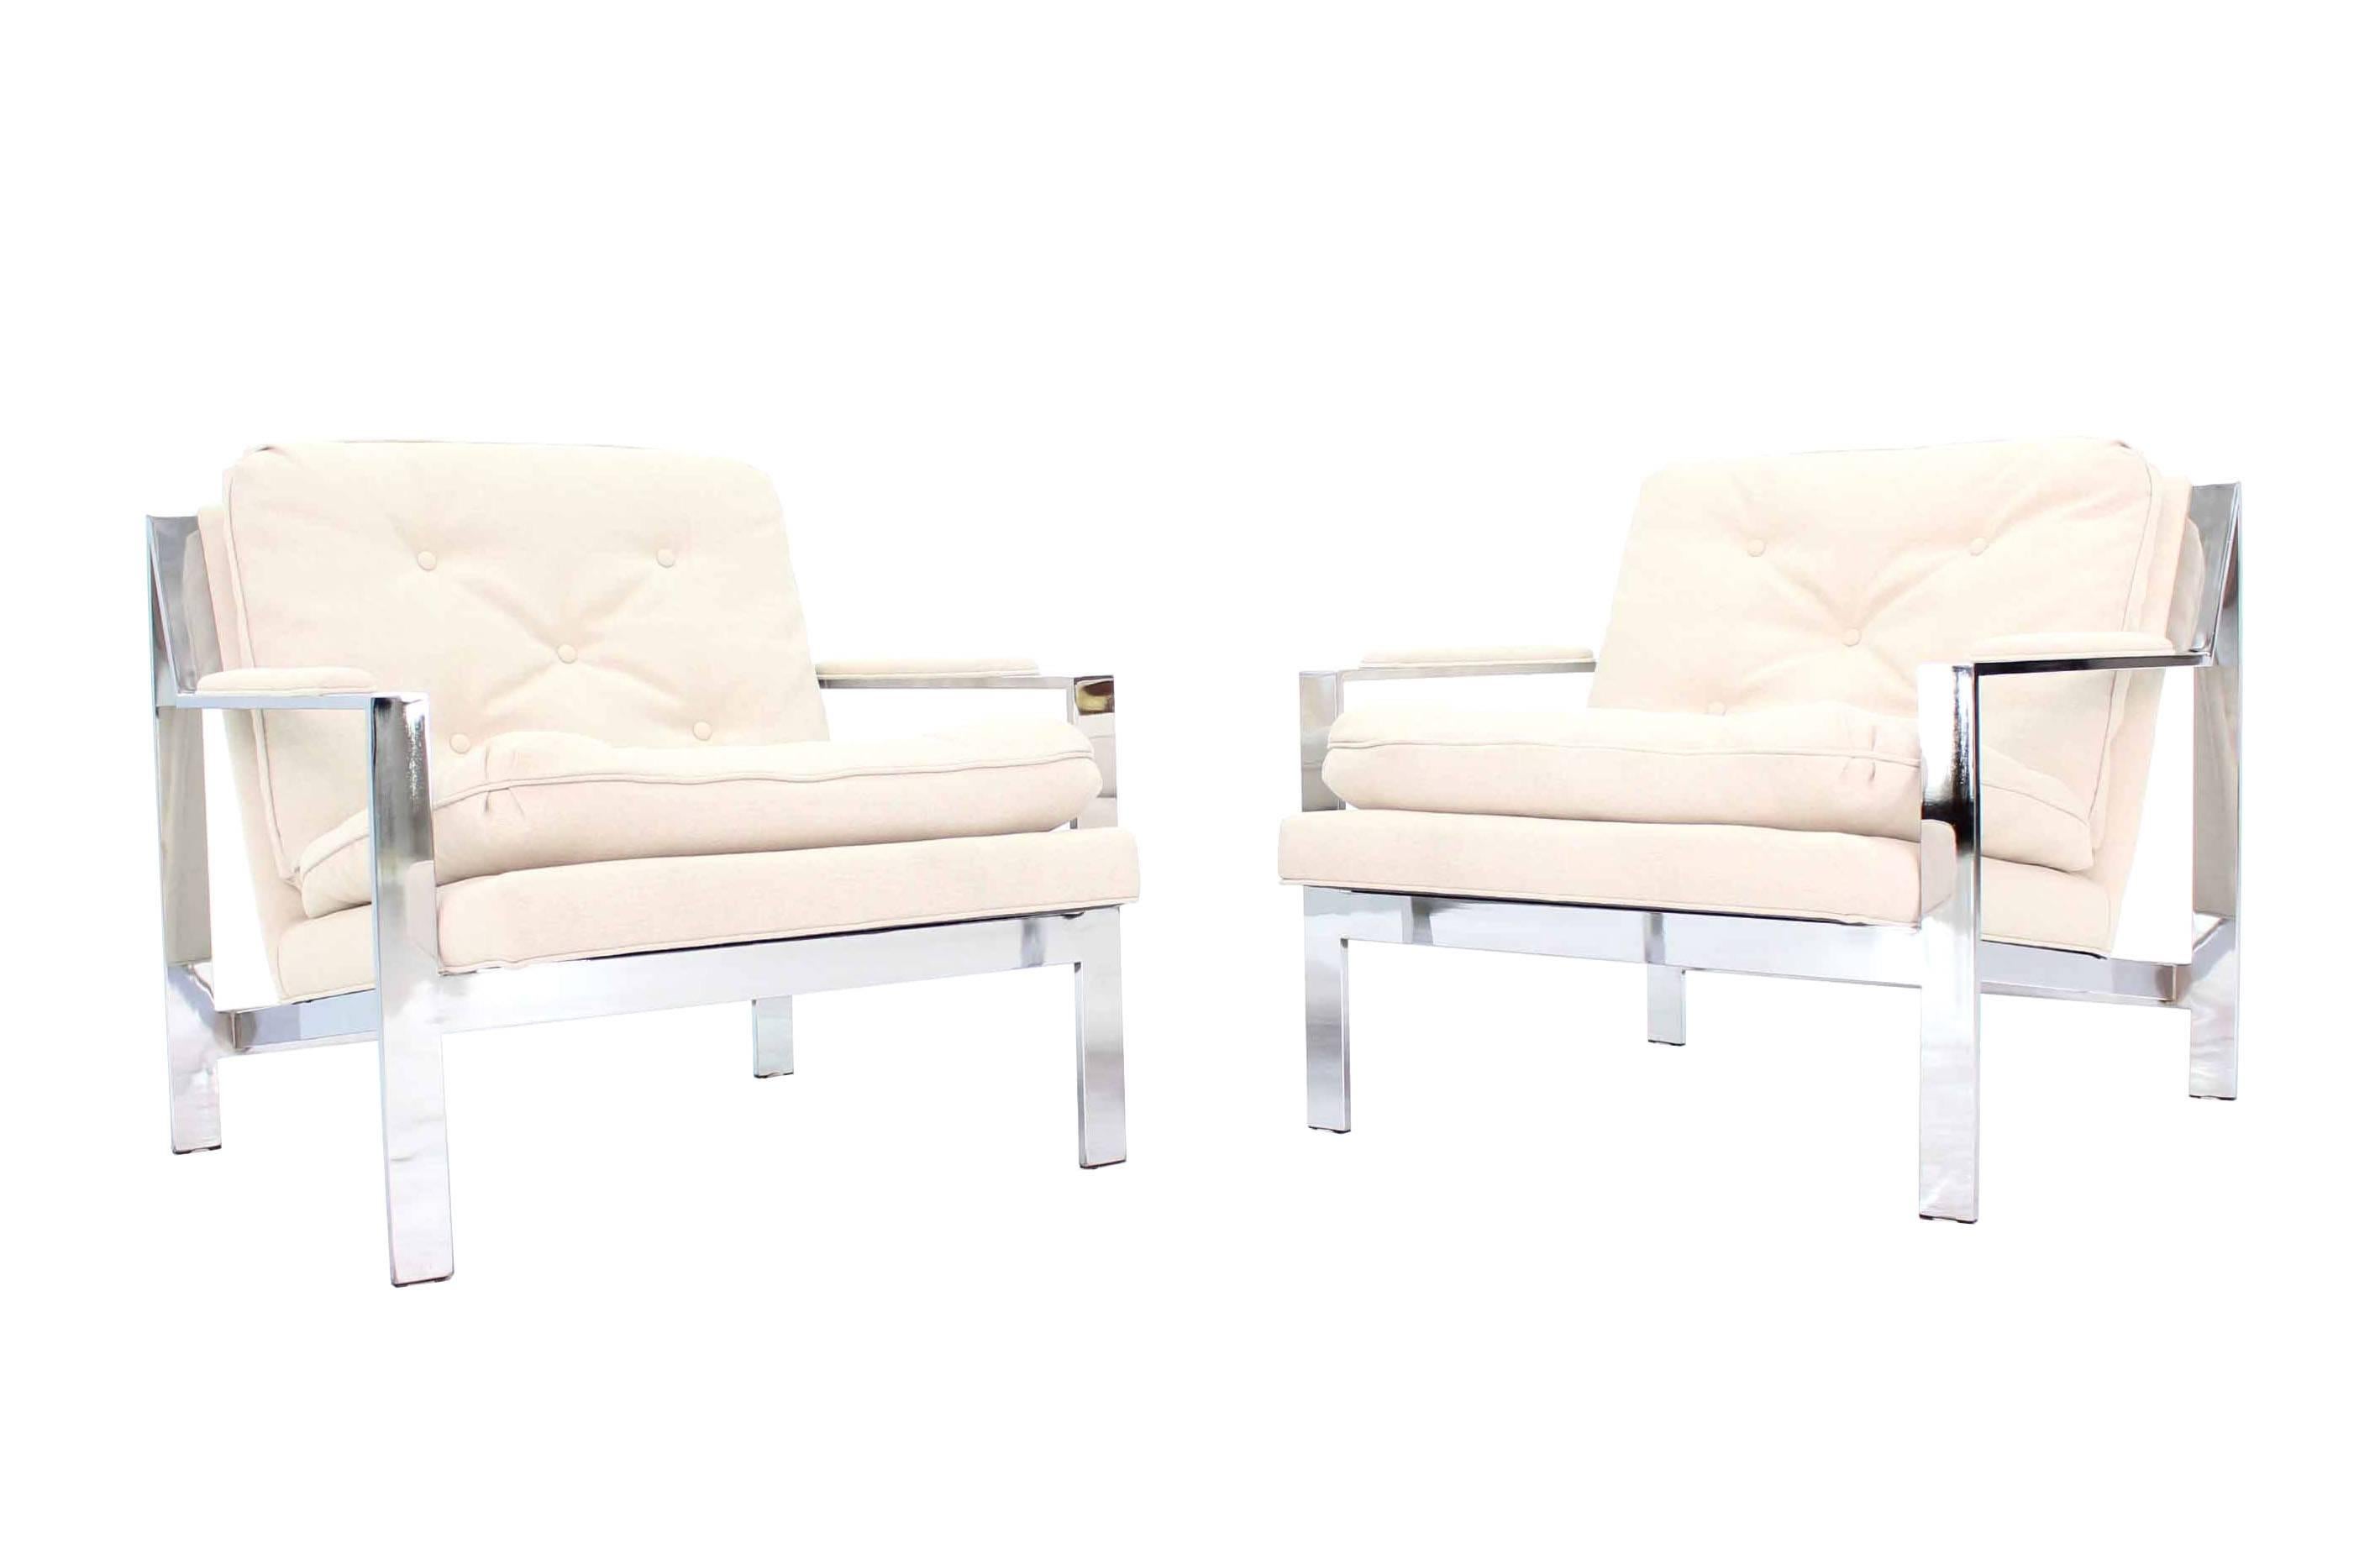 Pair of Chrome Lounge Chairs with New Upholstery  In Excellent Condition For Sale In Rockaway, NJ